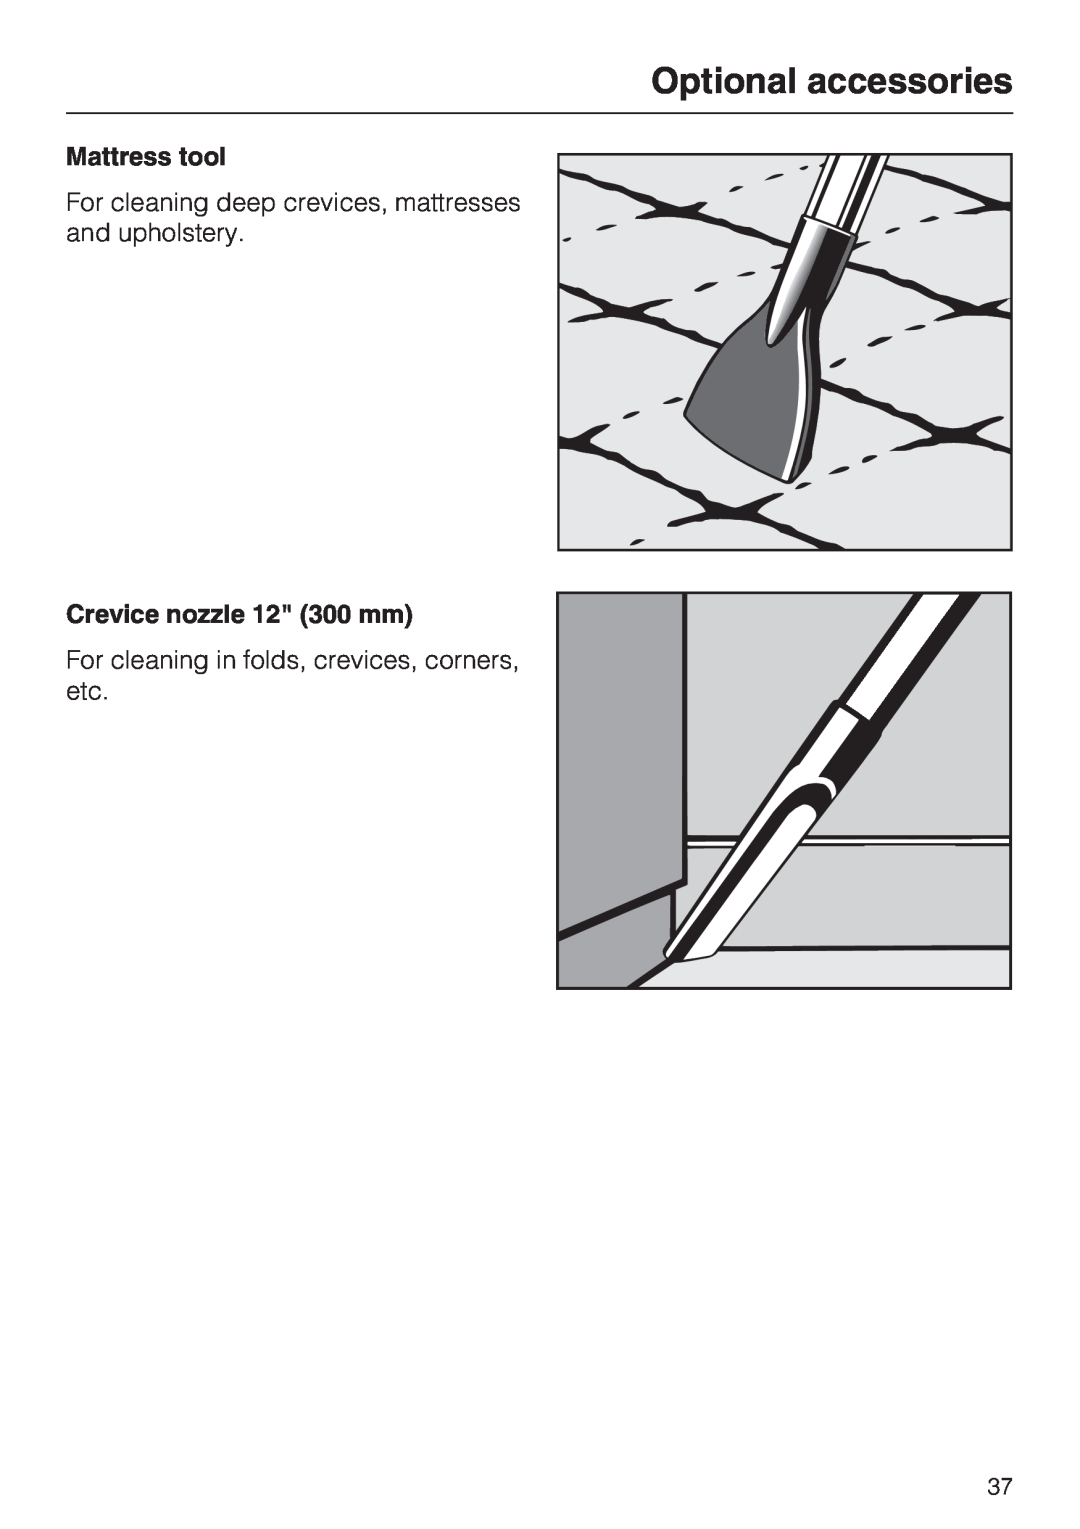 Miele S 4002 Optional accessories, Mattress tool, Crevice nozzle 12 300 mm, For cleaning in folds, crevices, corners, etc 